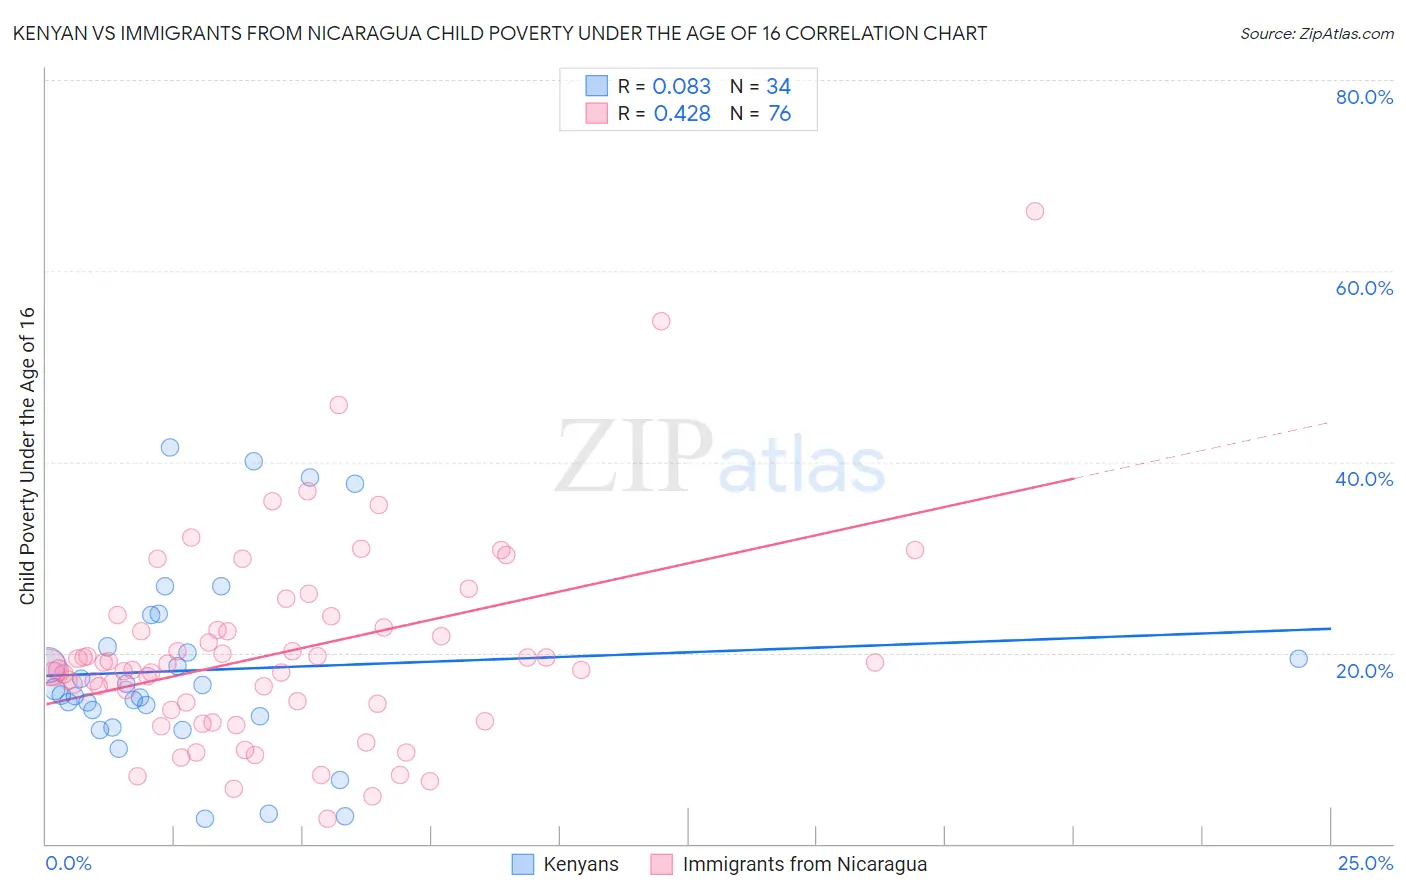 Kenyan vs Immigrants from Nicaragua Child Poverty Under the Age of 16